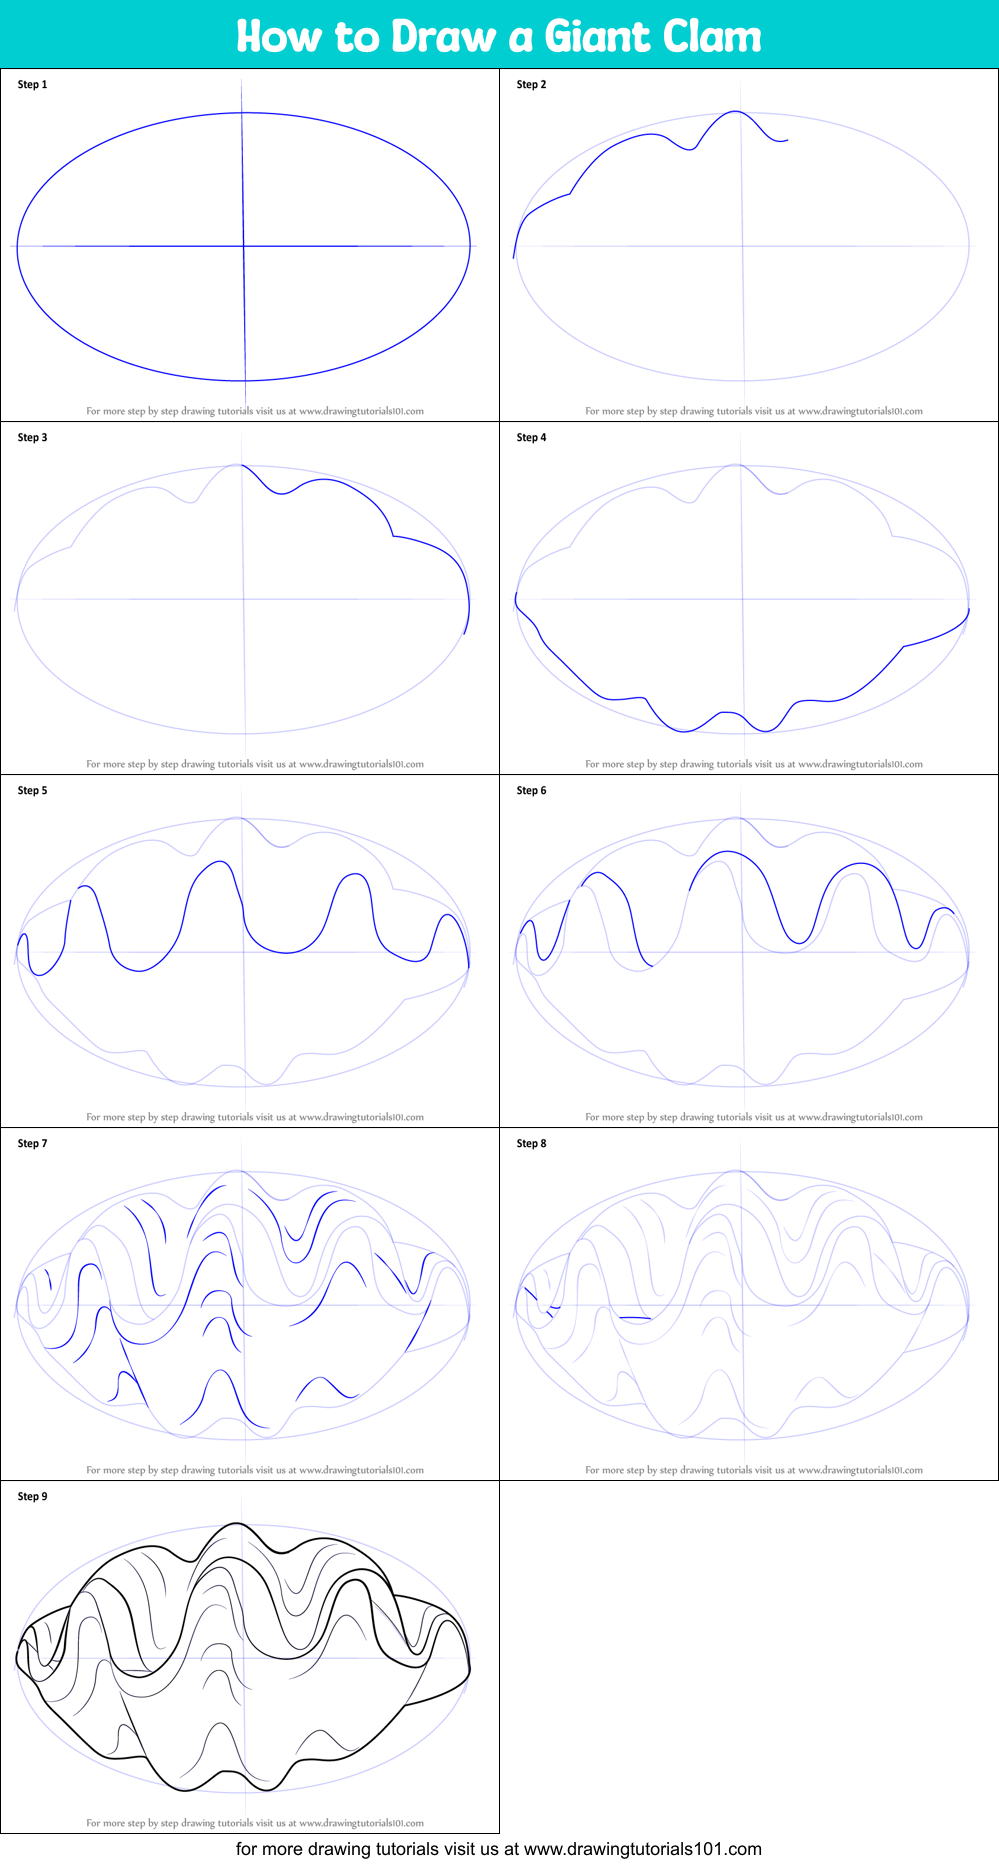 How to Draw a Giant Clam printable step by step drawing sheet